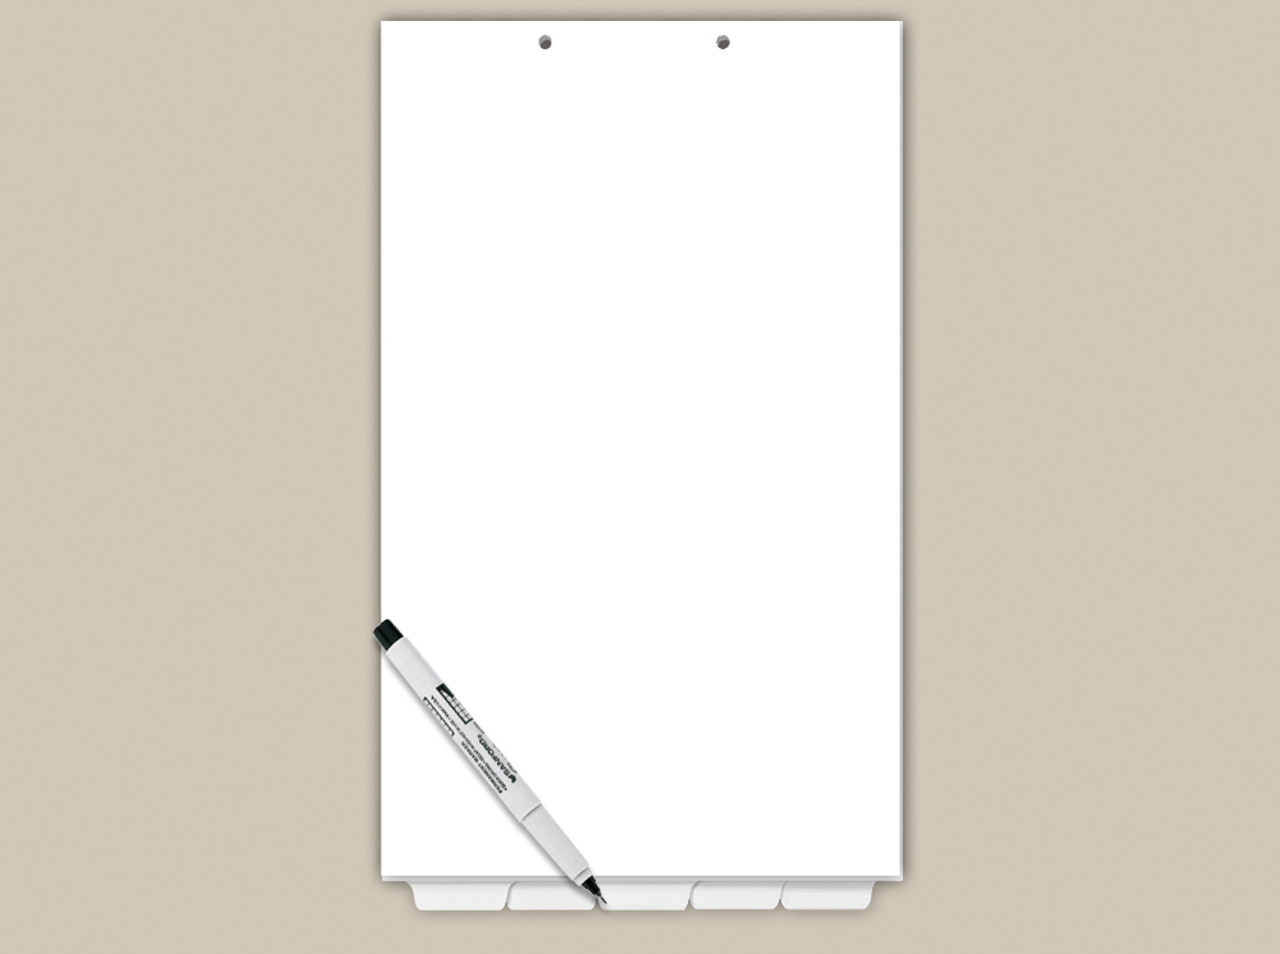 Blank - Plain Paper Collated 1/5 Cut Bottom Tab (Legal Size)